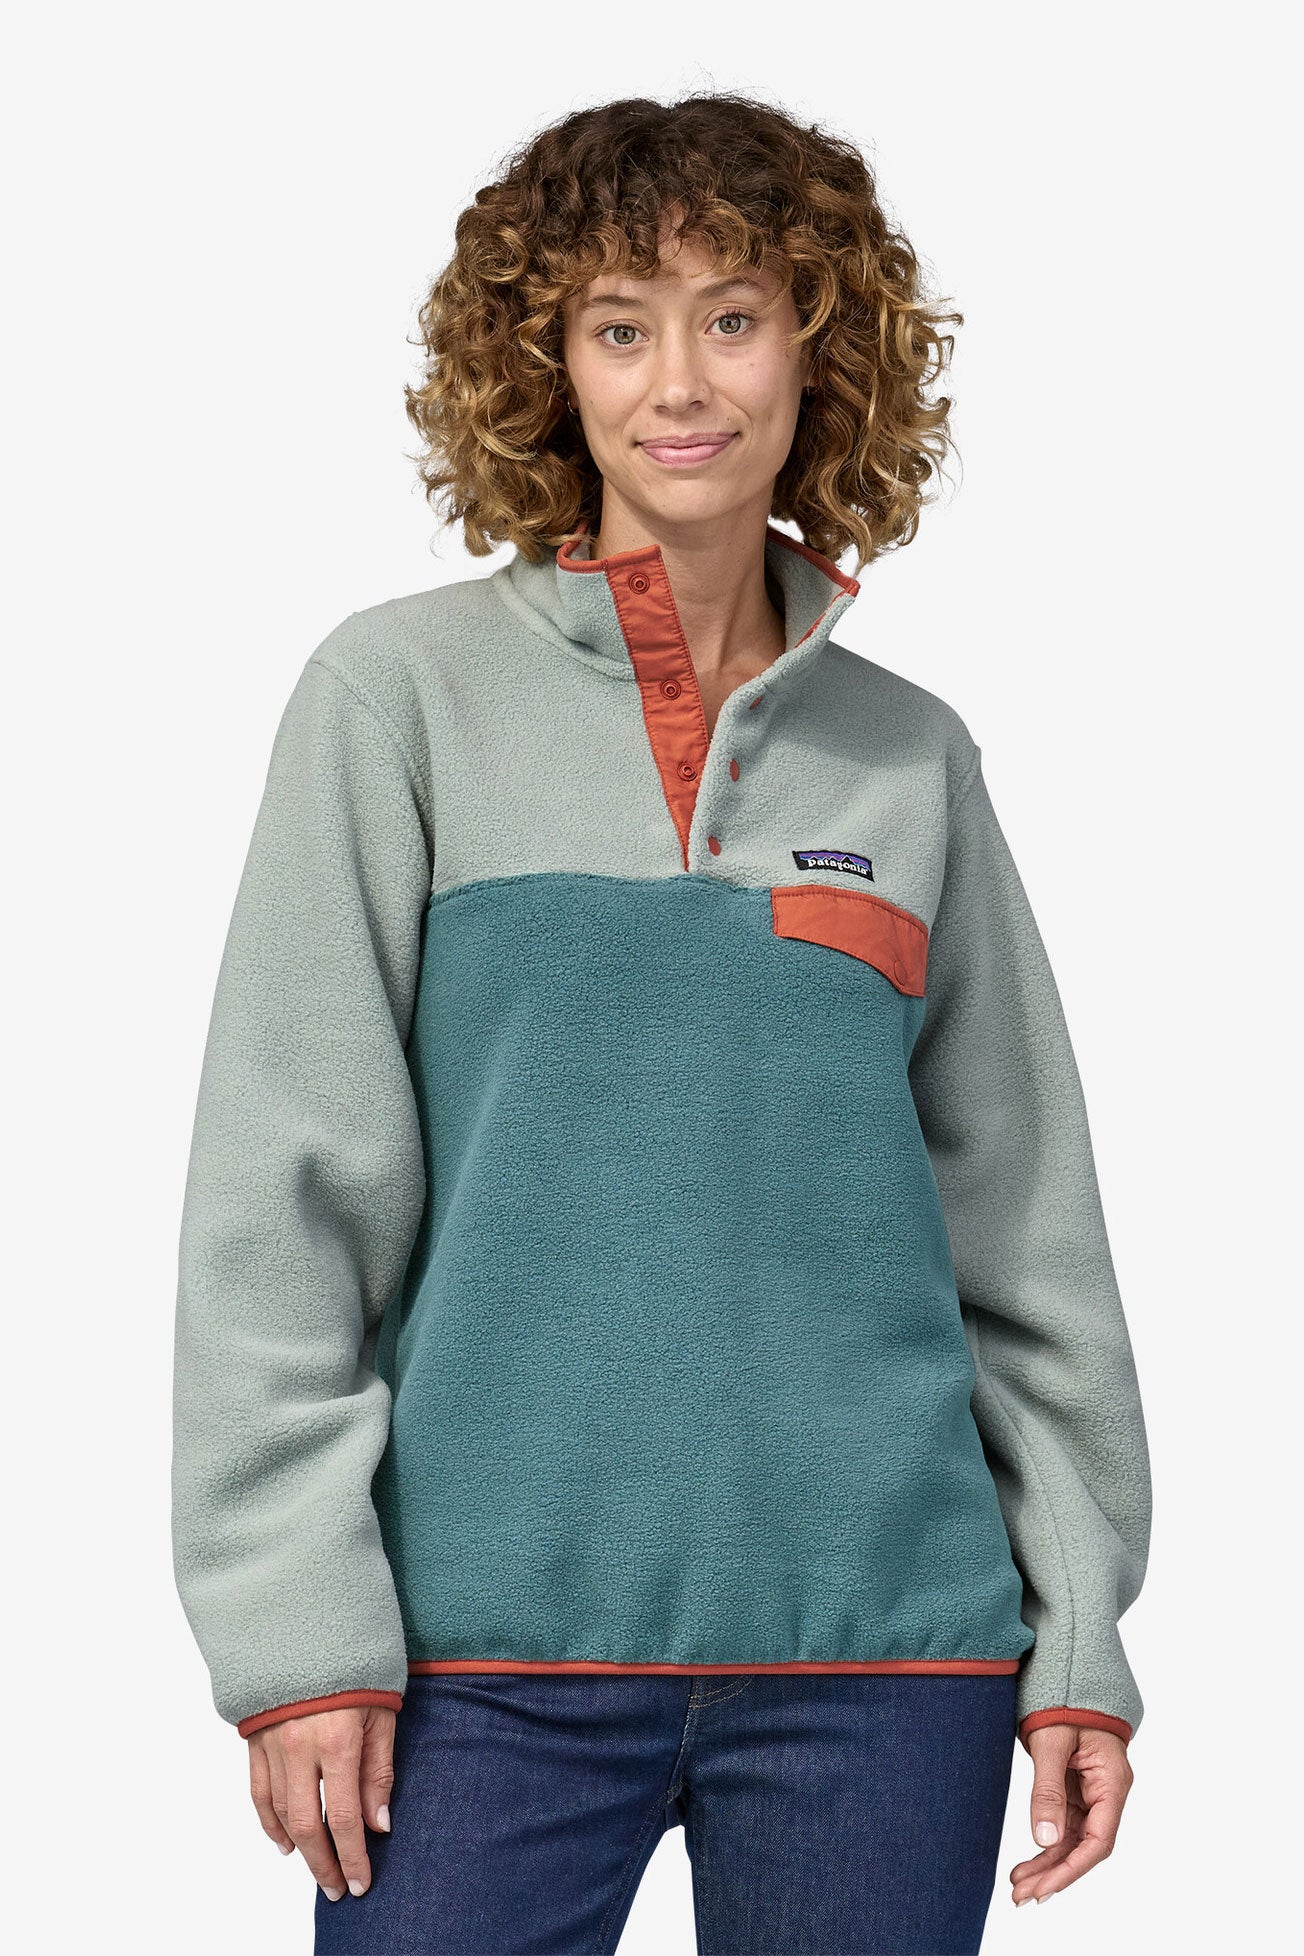 Patagonia Light Weight Synchilla Snap-T Pullover - Women's